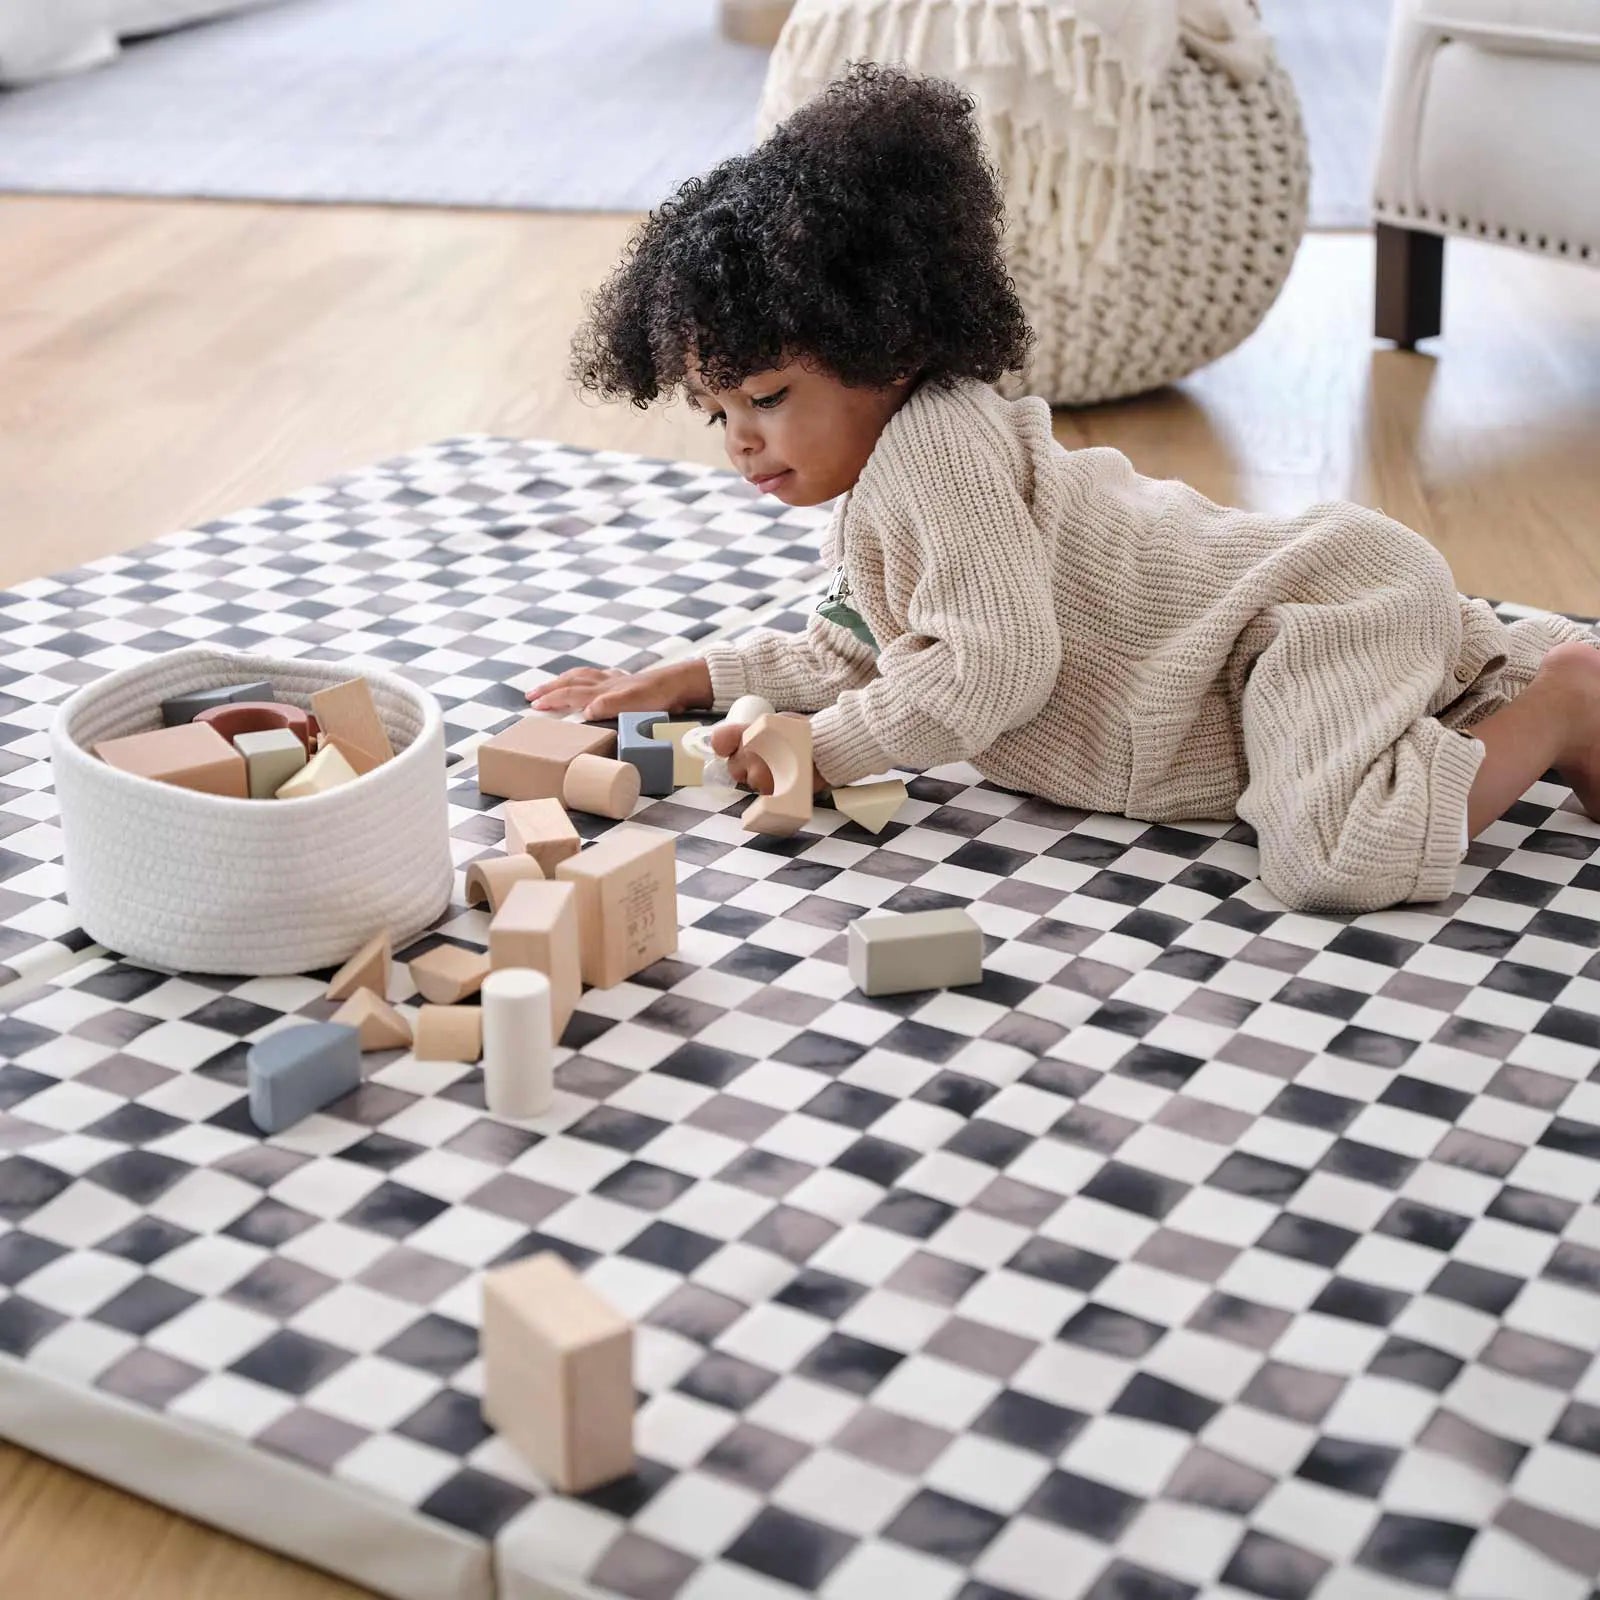 Tuxedo black and white checker print tumbling mat with toddler laying on the mat playing with wooden blocks